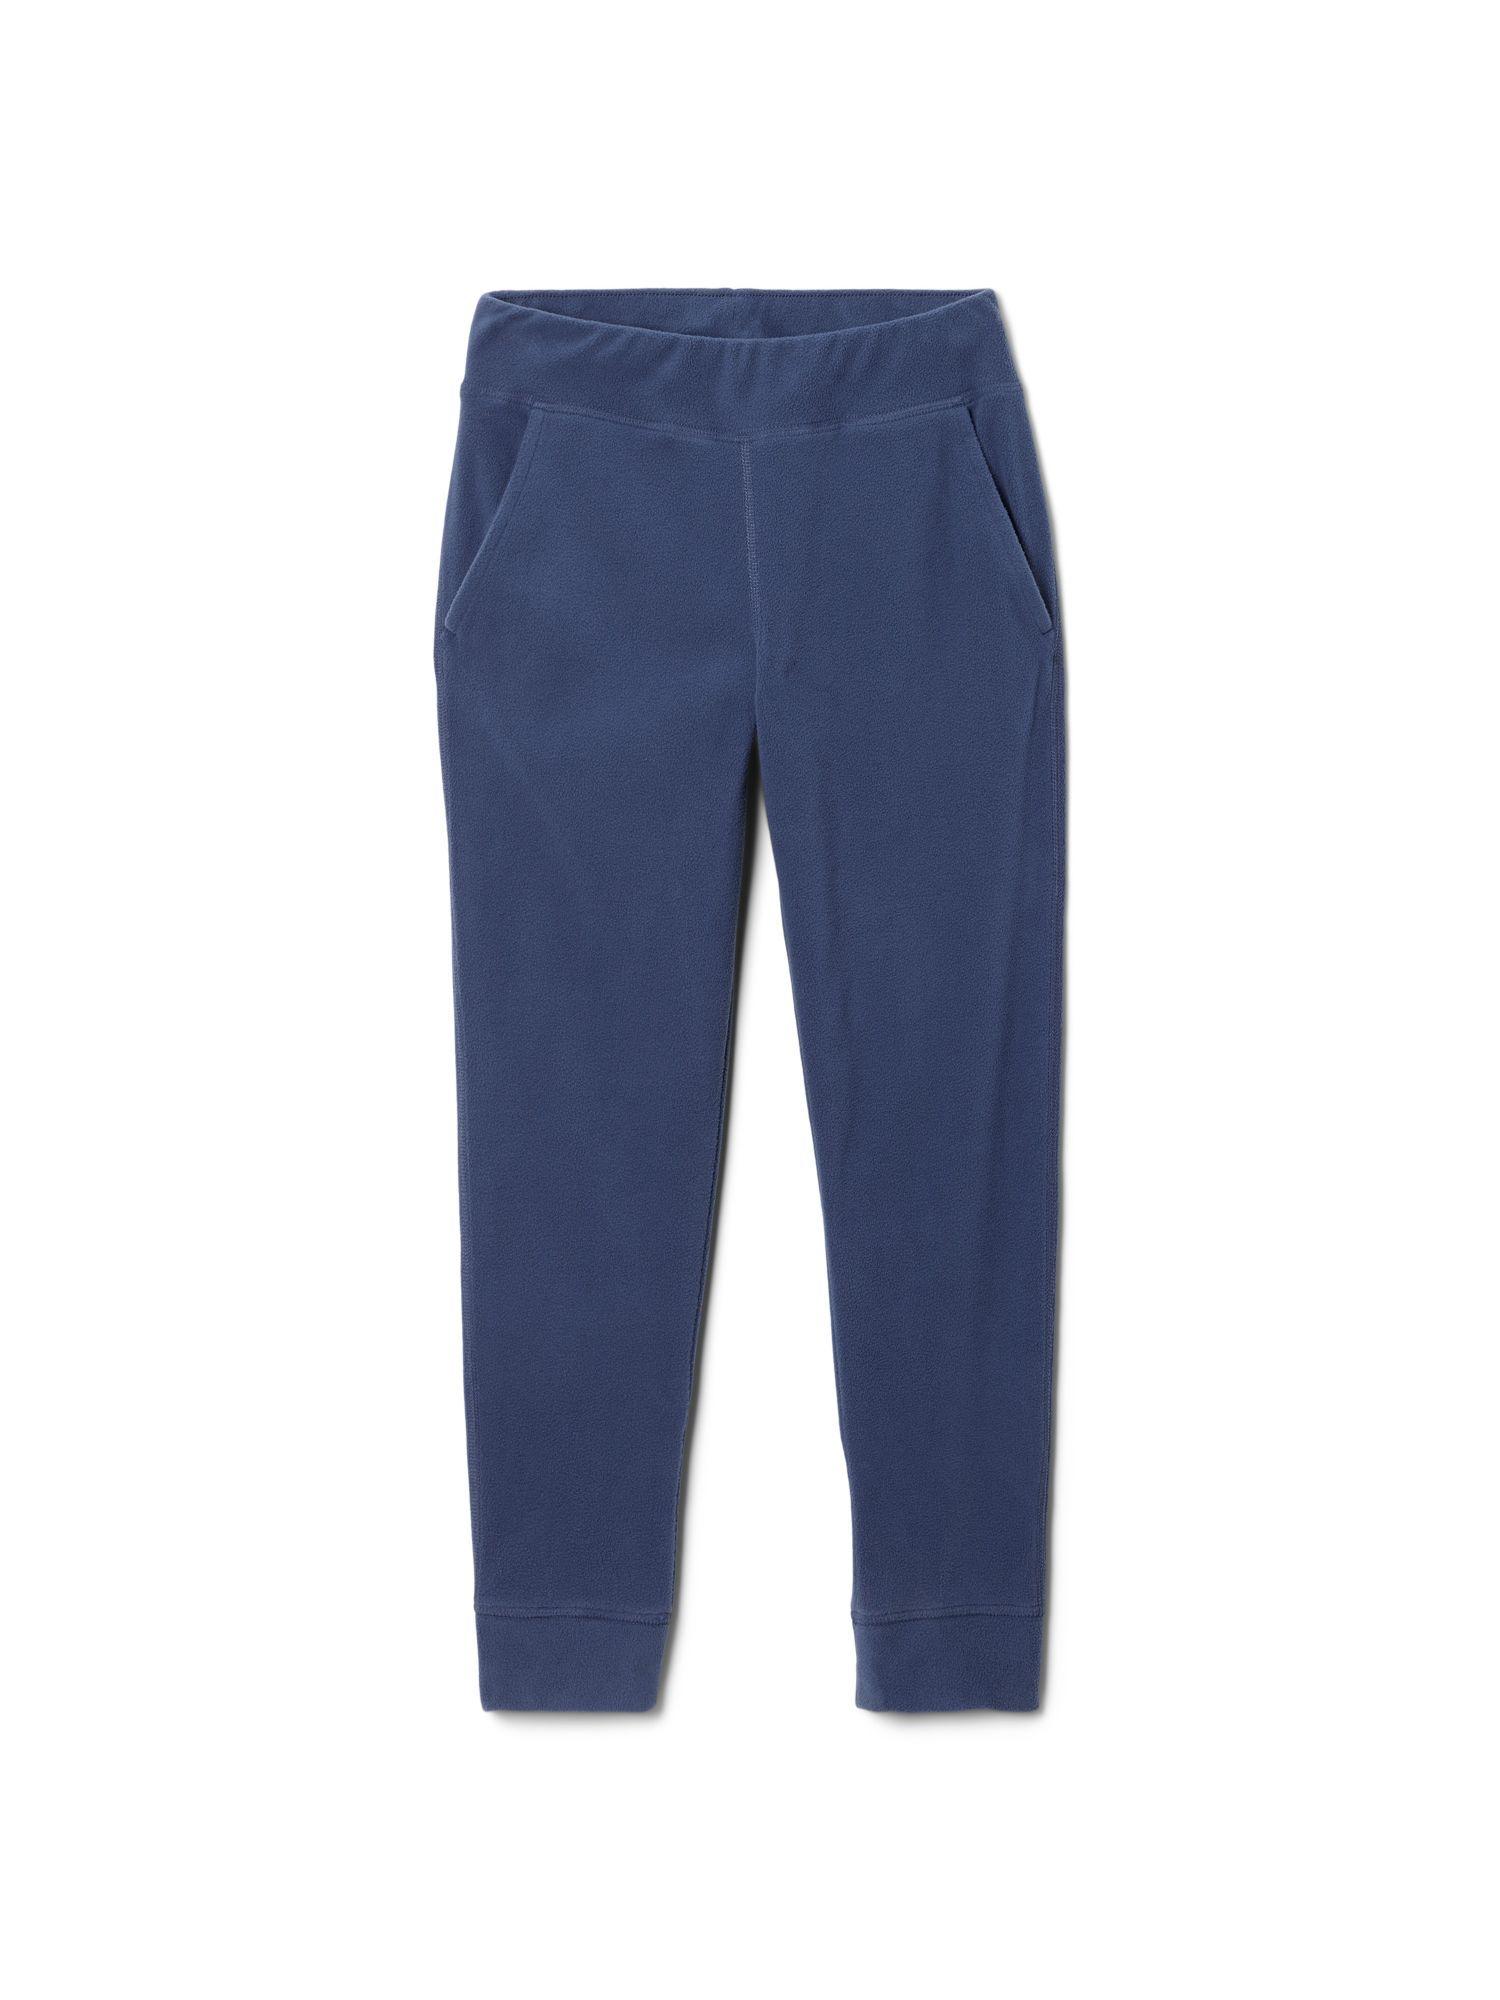 youth girls blue glacial joggers